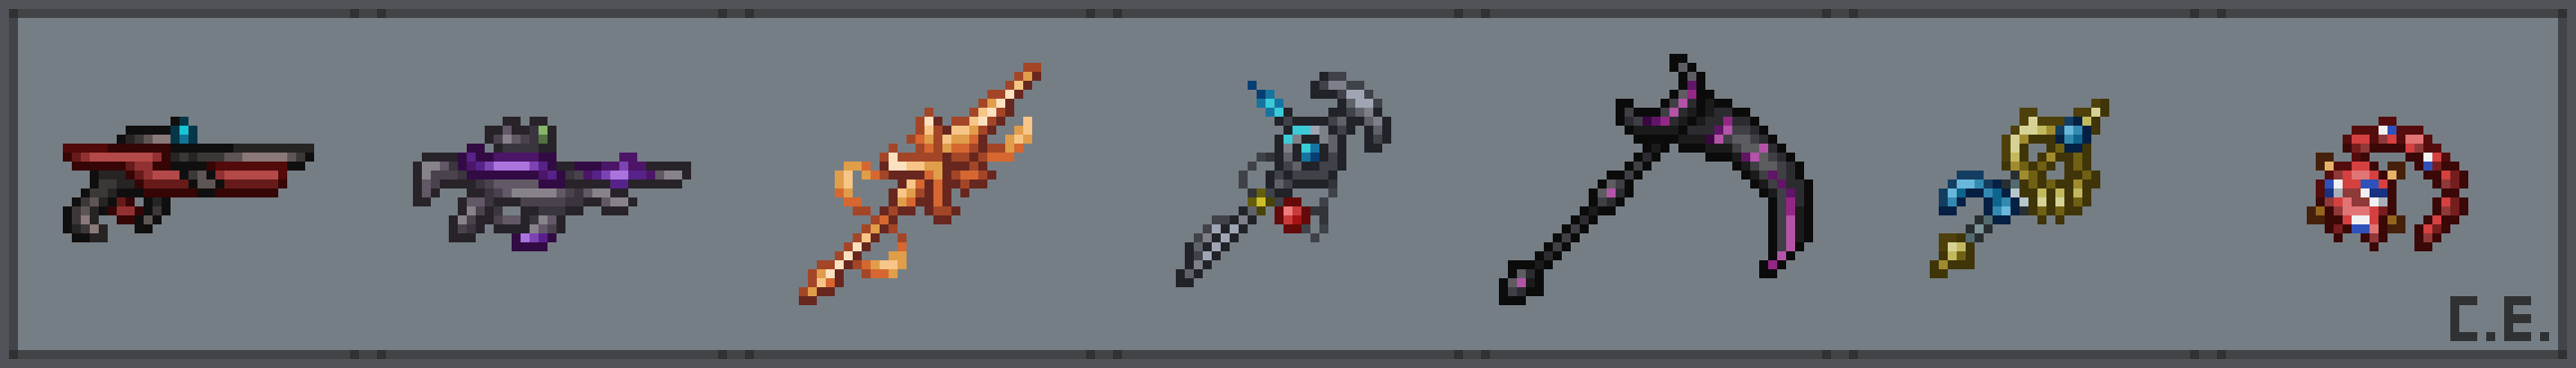 the Clothier on Twitter: "Terraria Weapons in Edward's Style (Part 33) Weapons of the Week: Dart Dart Rifle, Daybreak, Sphere Staff, Death Desert Tiger Staff, and the Drippler